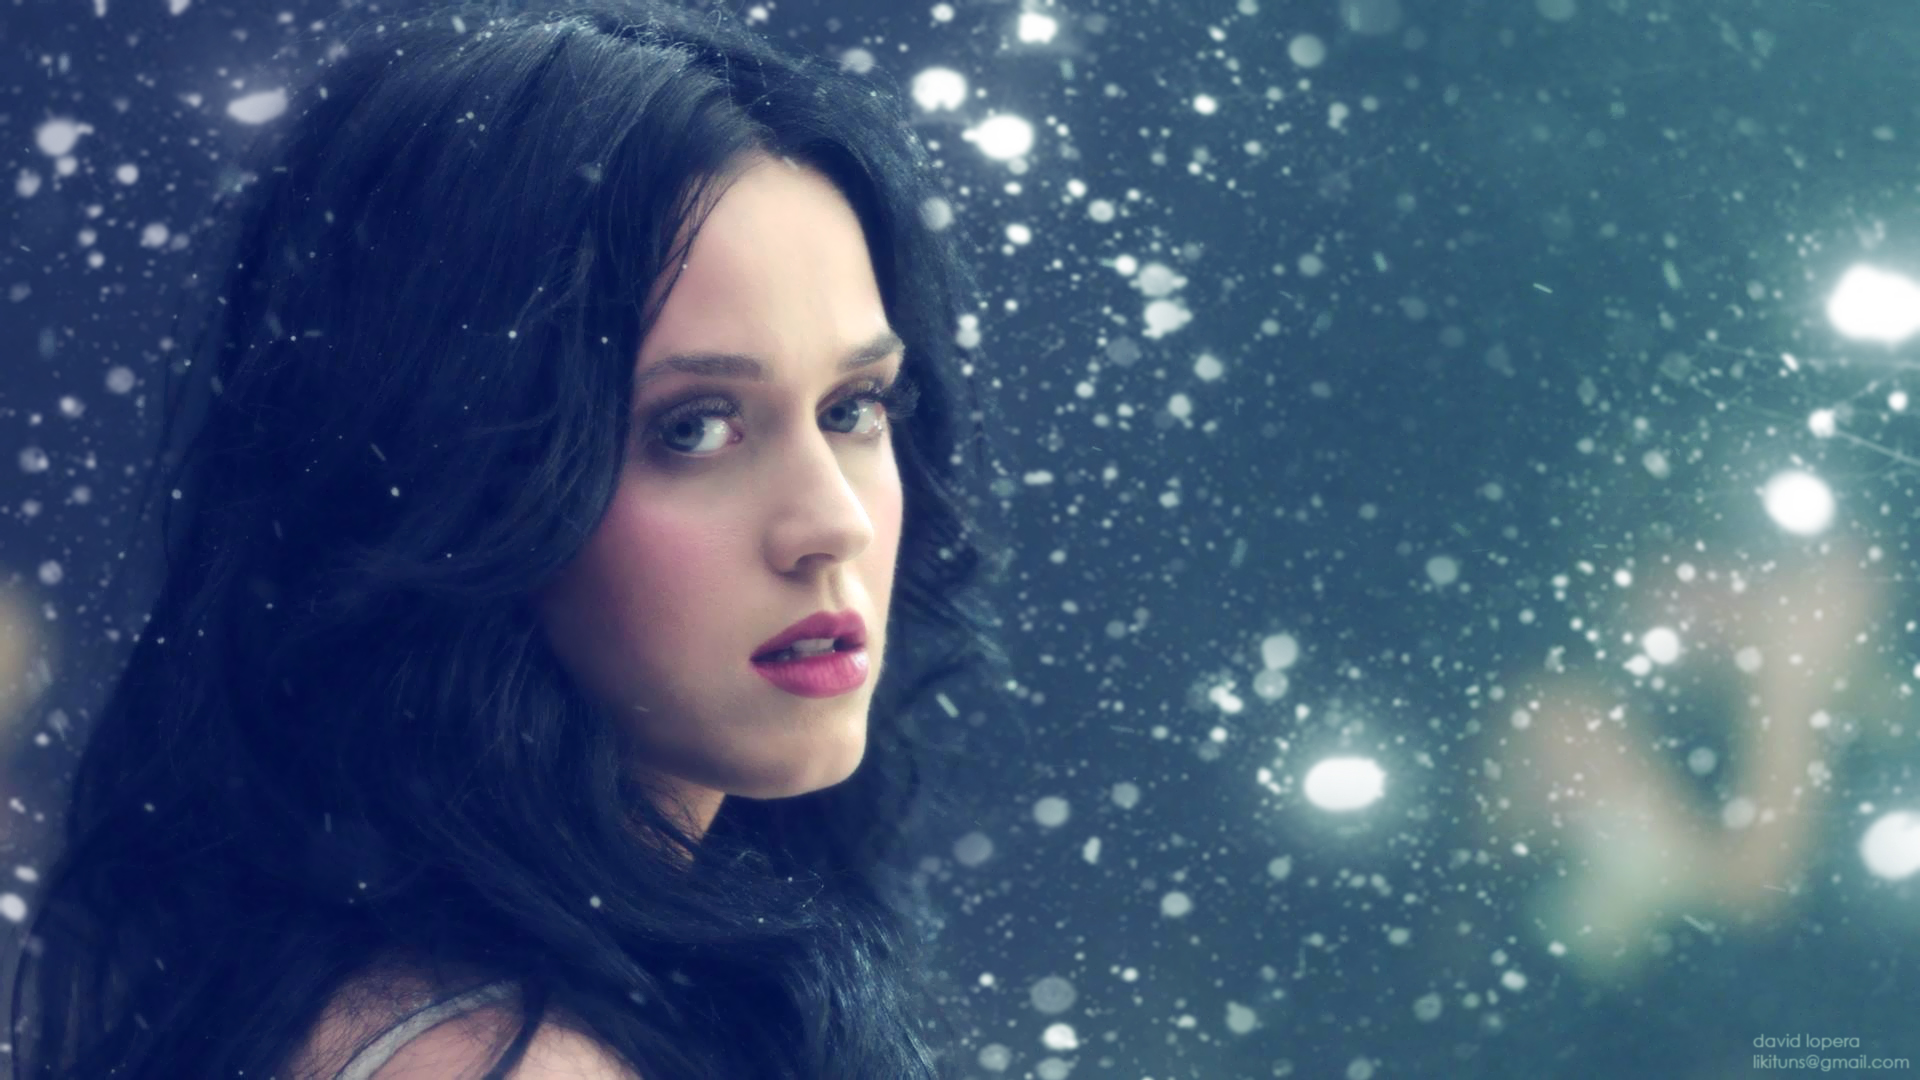 Katy Perry mp3 - High Definition : Widescreen Wallpapers